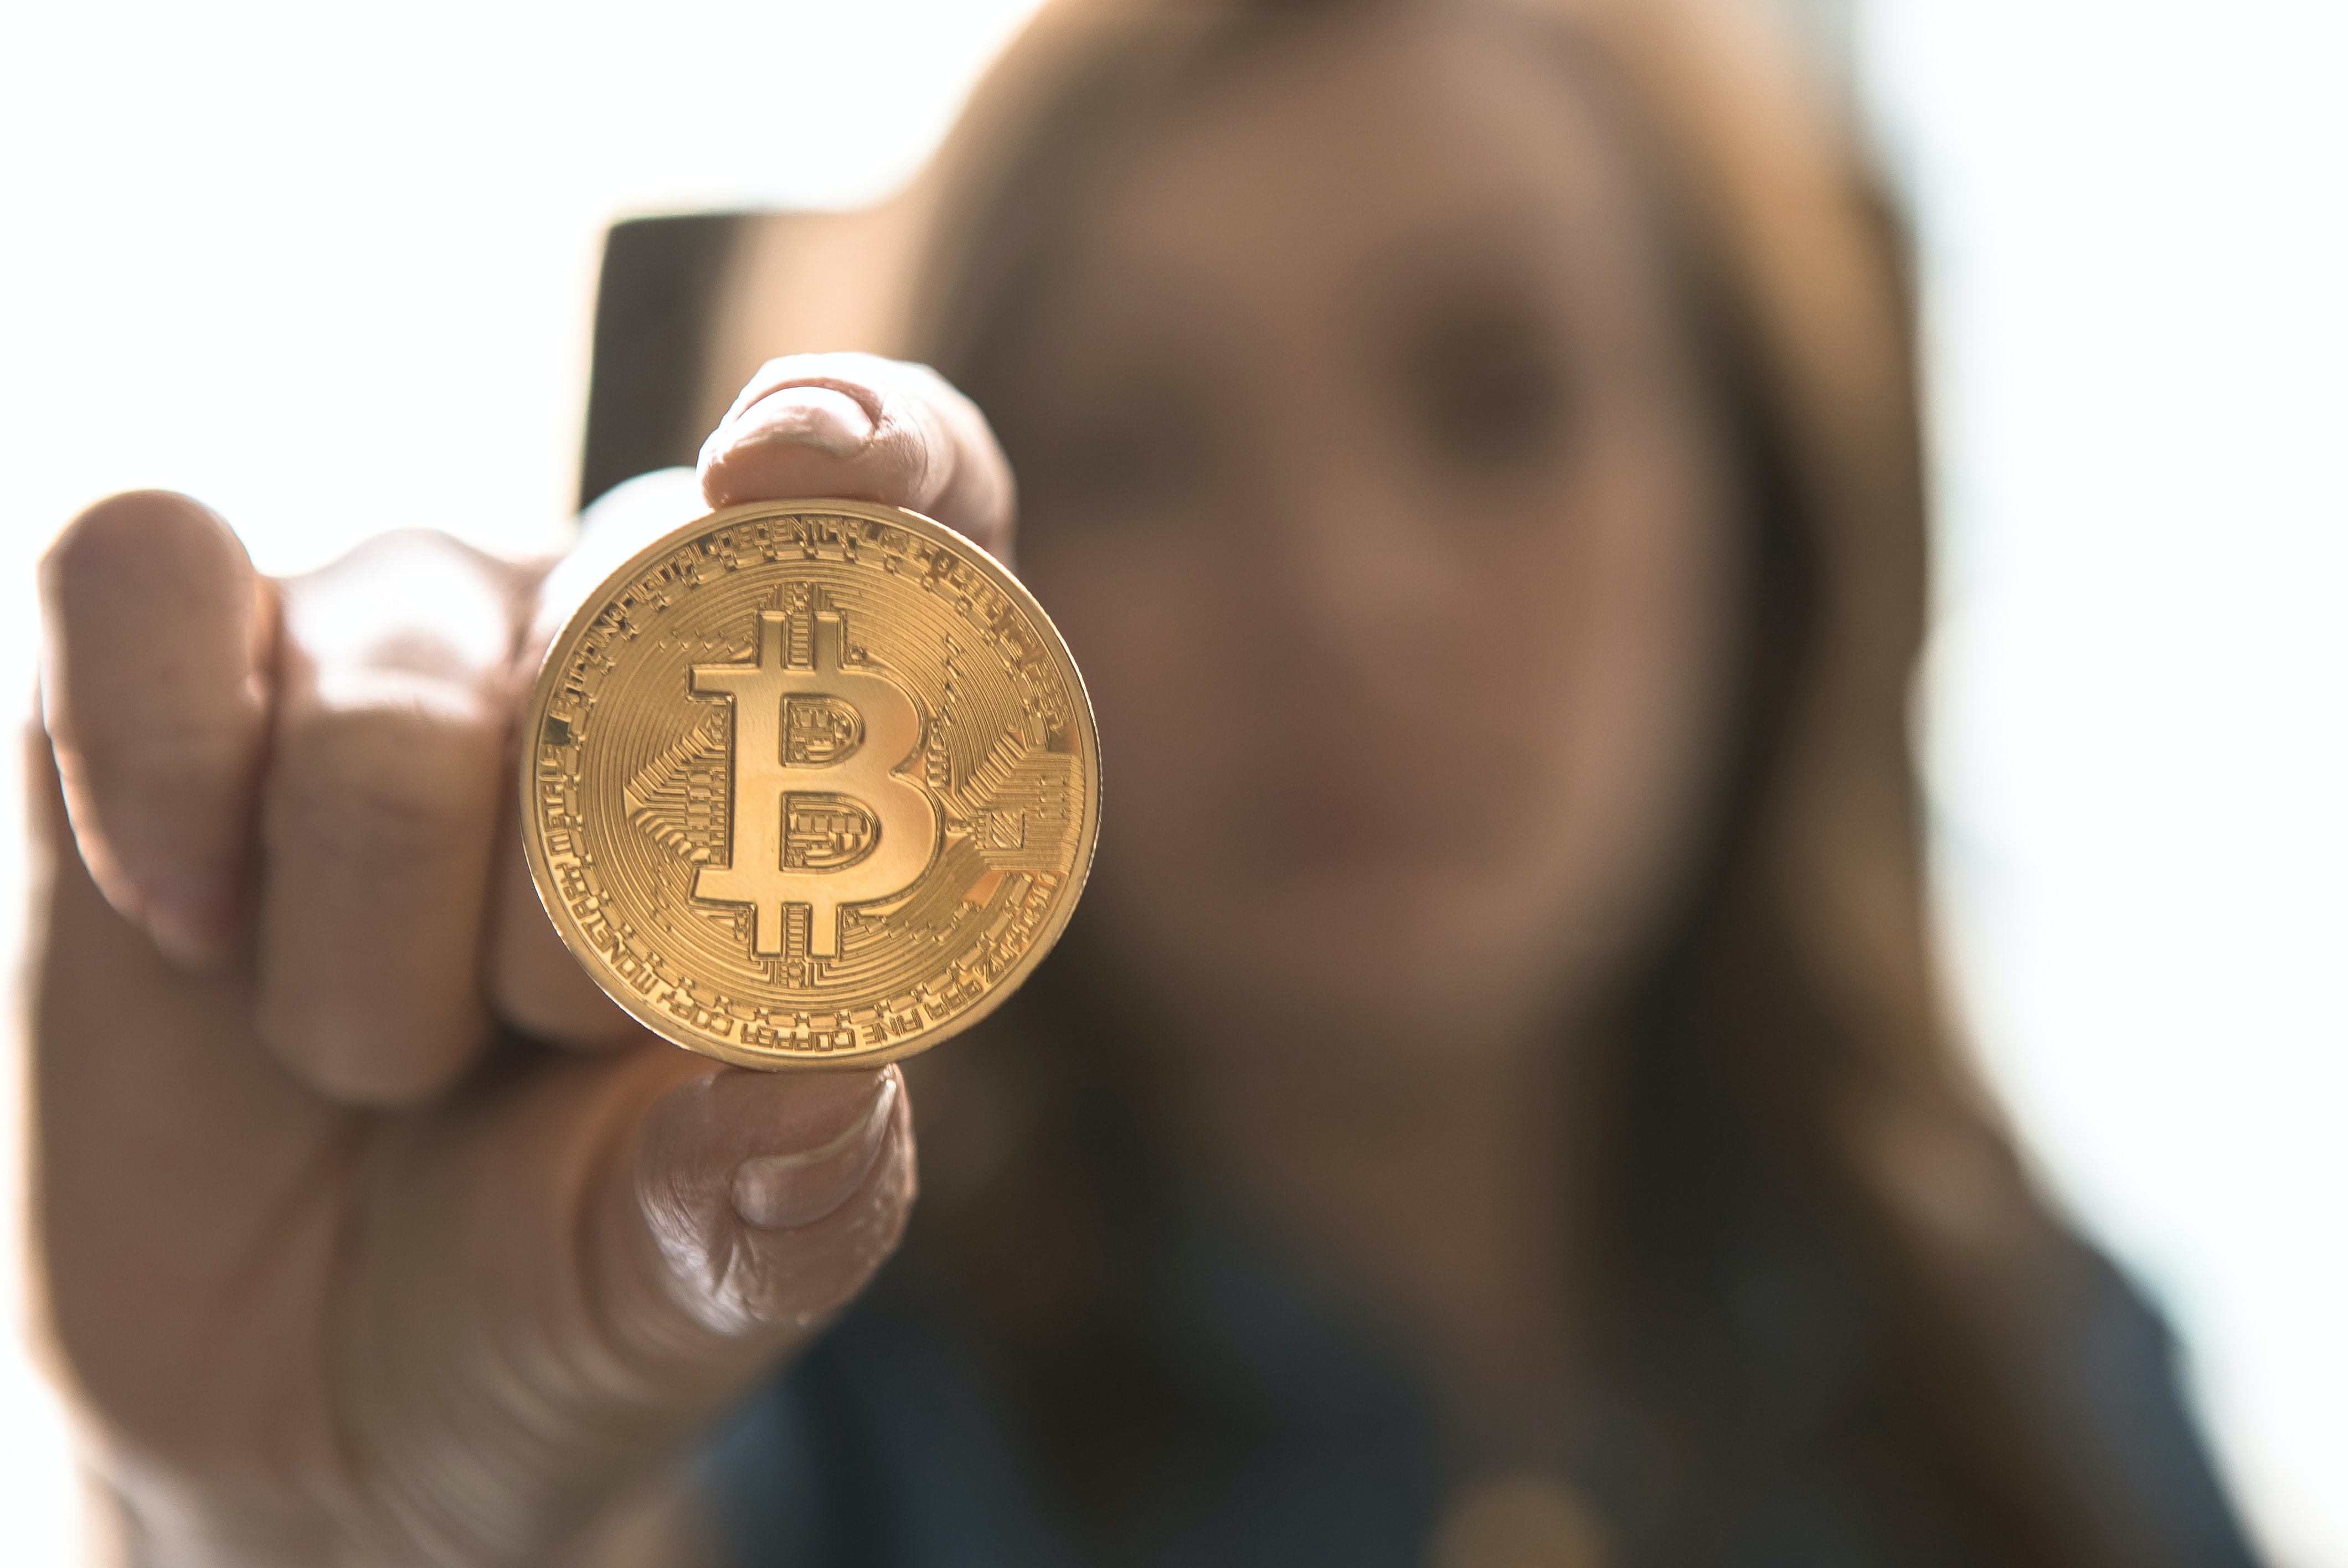 Users' Identities May Be Revealed by Mapping the Bitcoin Economy